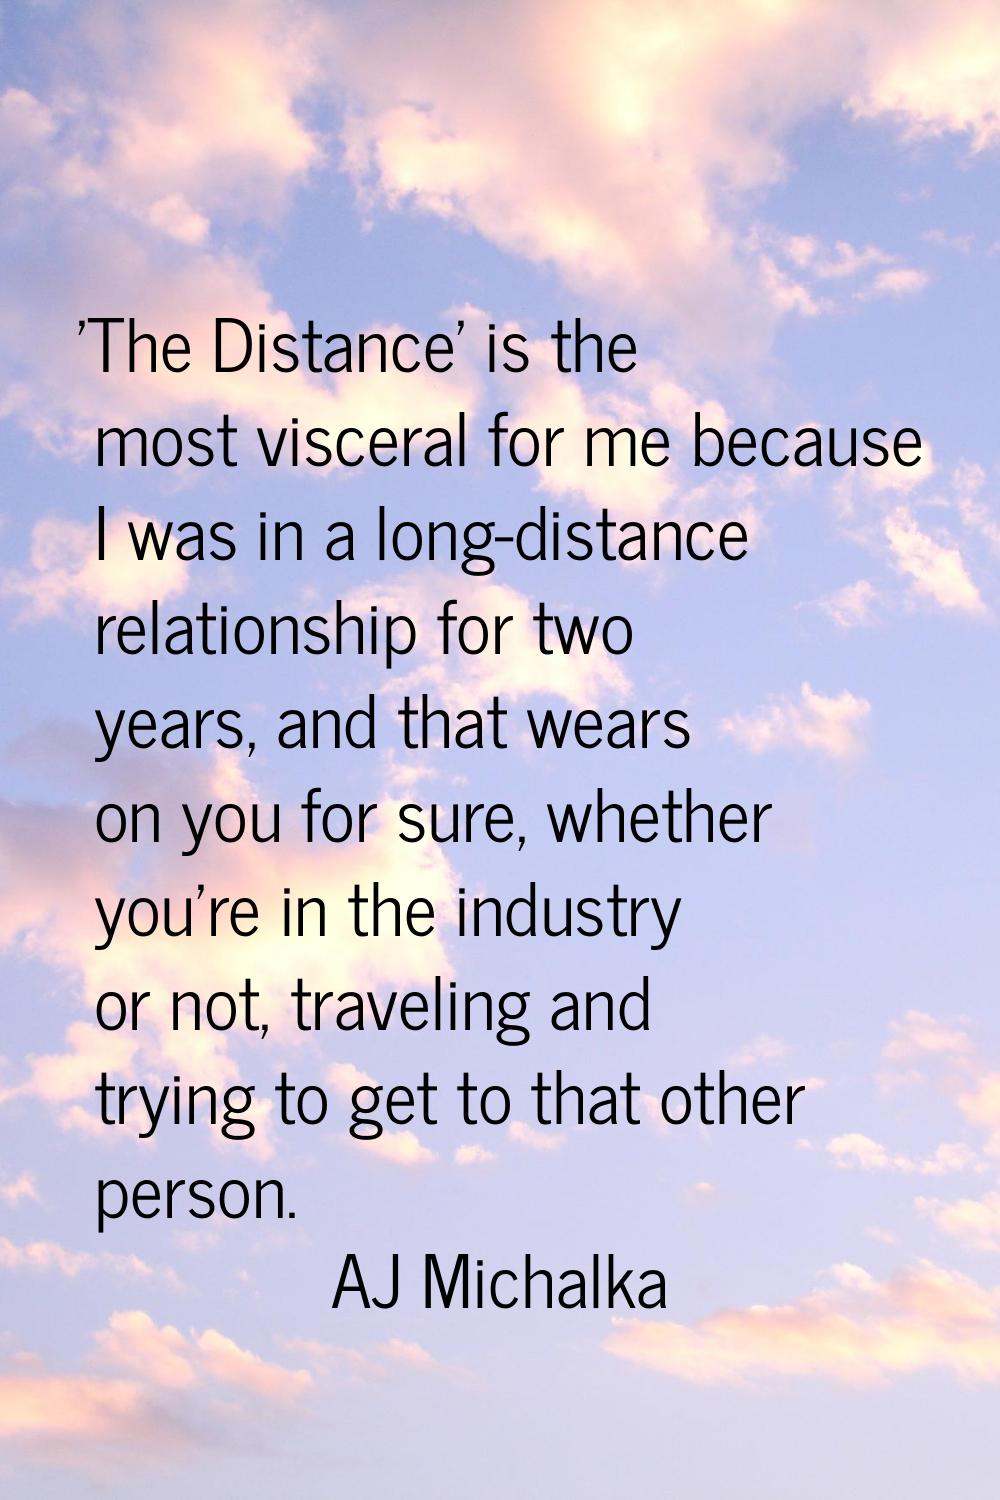 'The Distance' is the most visceral for me because I was in a long-distance relationship for two ye